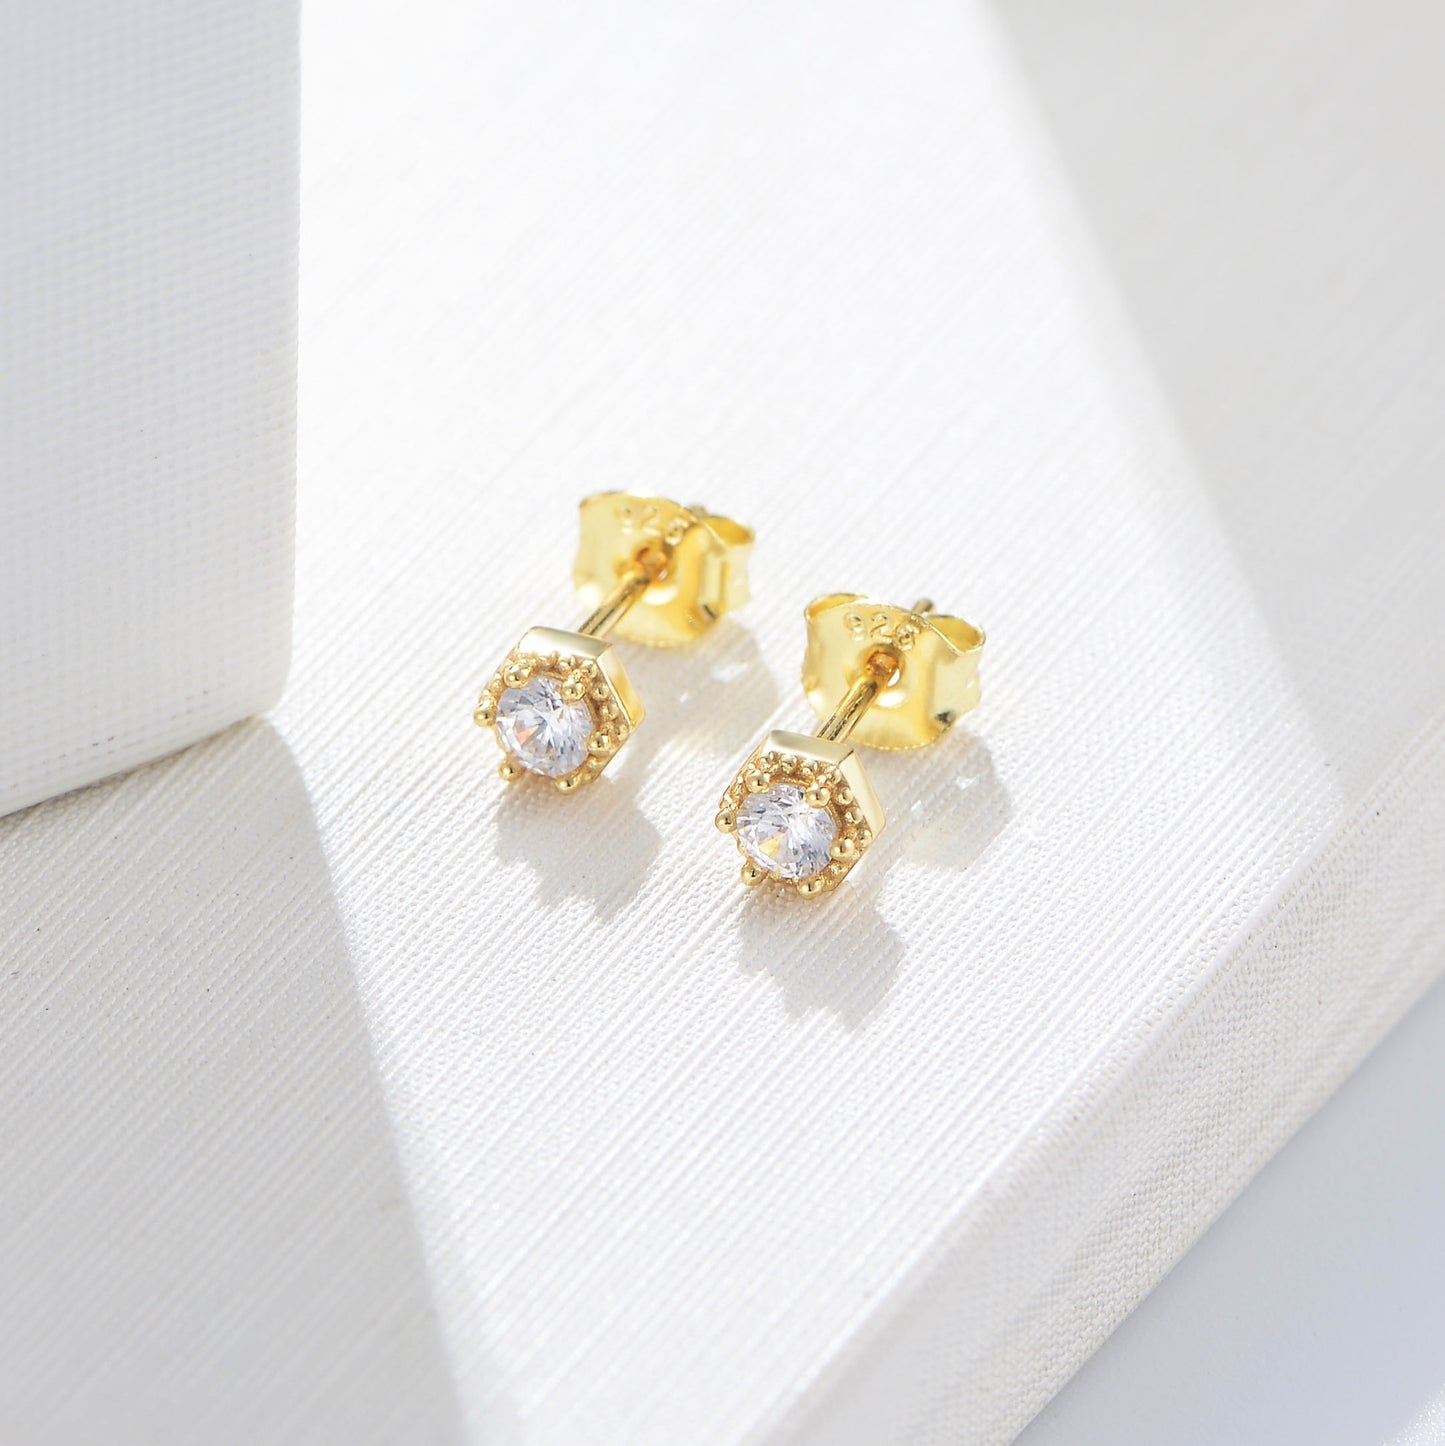 Hexagon with Round Zircon Silver Studs Earrings for Women